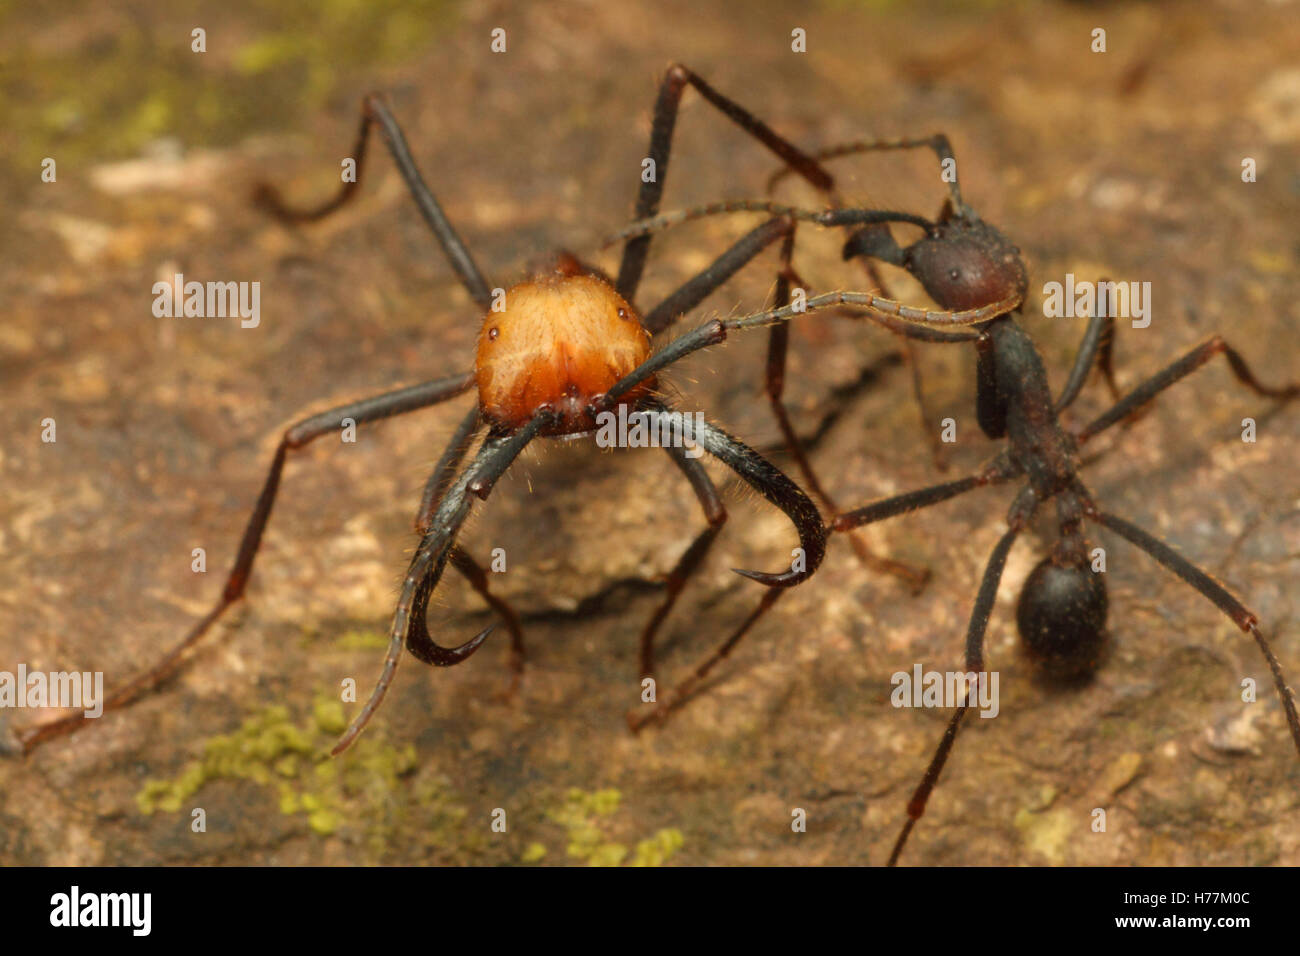 Army ant (Eciton sp.) soldier and worker. Rainforest in Rincon de la Vieja National Park, Costa Rica. Stock Photo